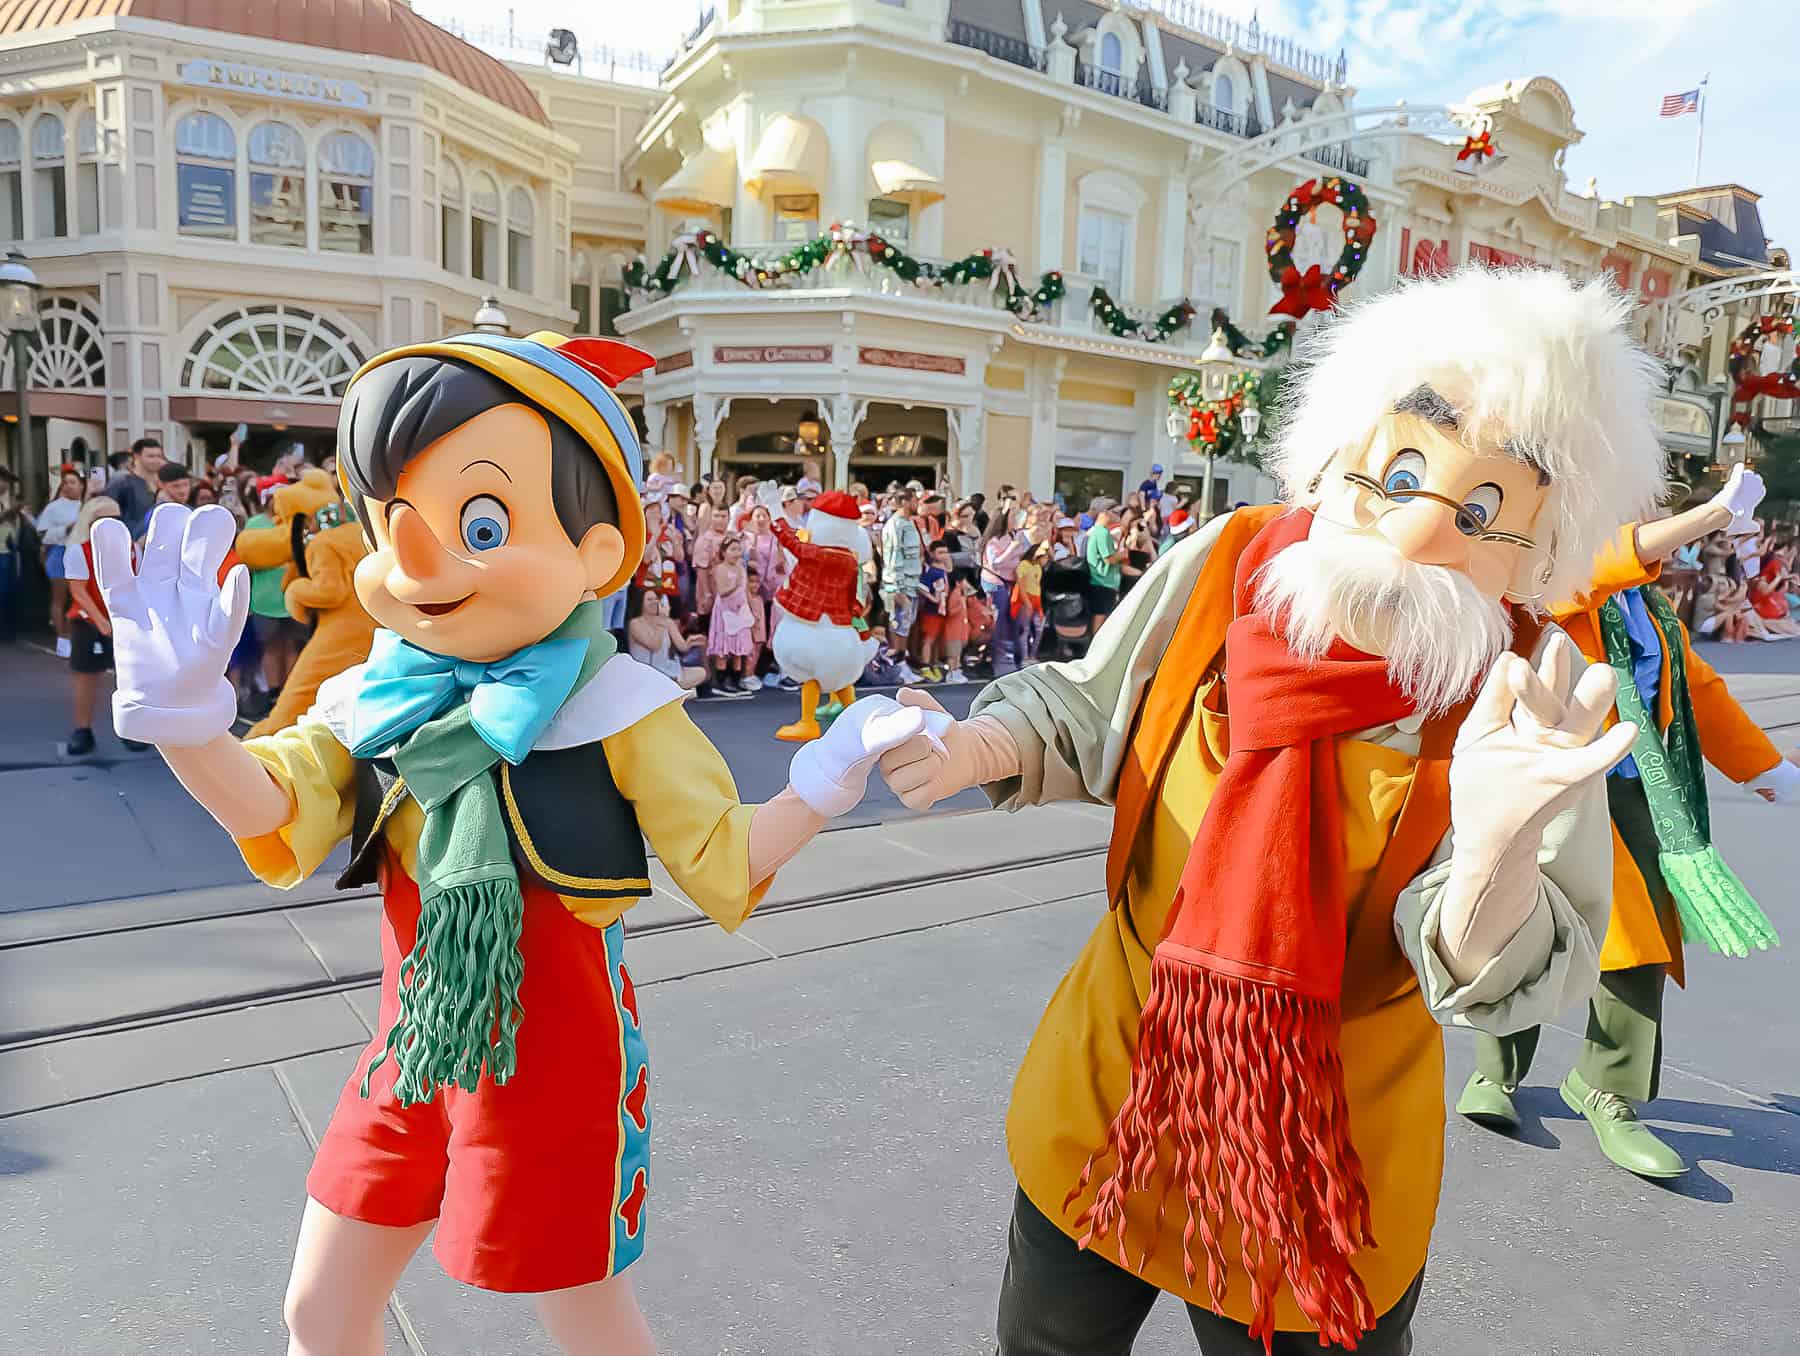 Pinocchio and Gepetto waving to the camera in Magic Kingdom's Christmas Parade. 